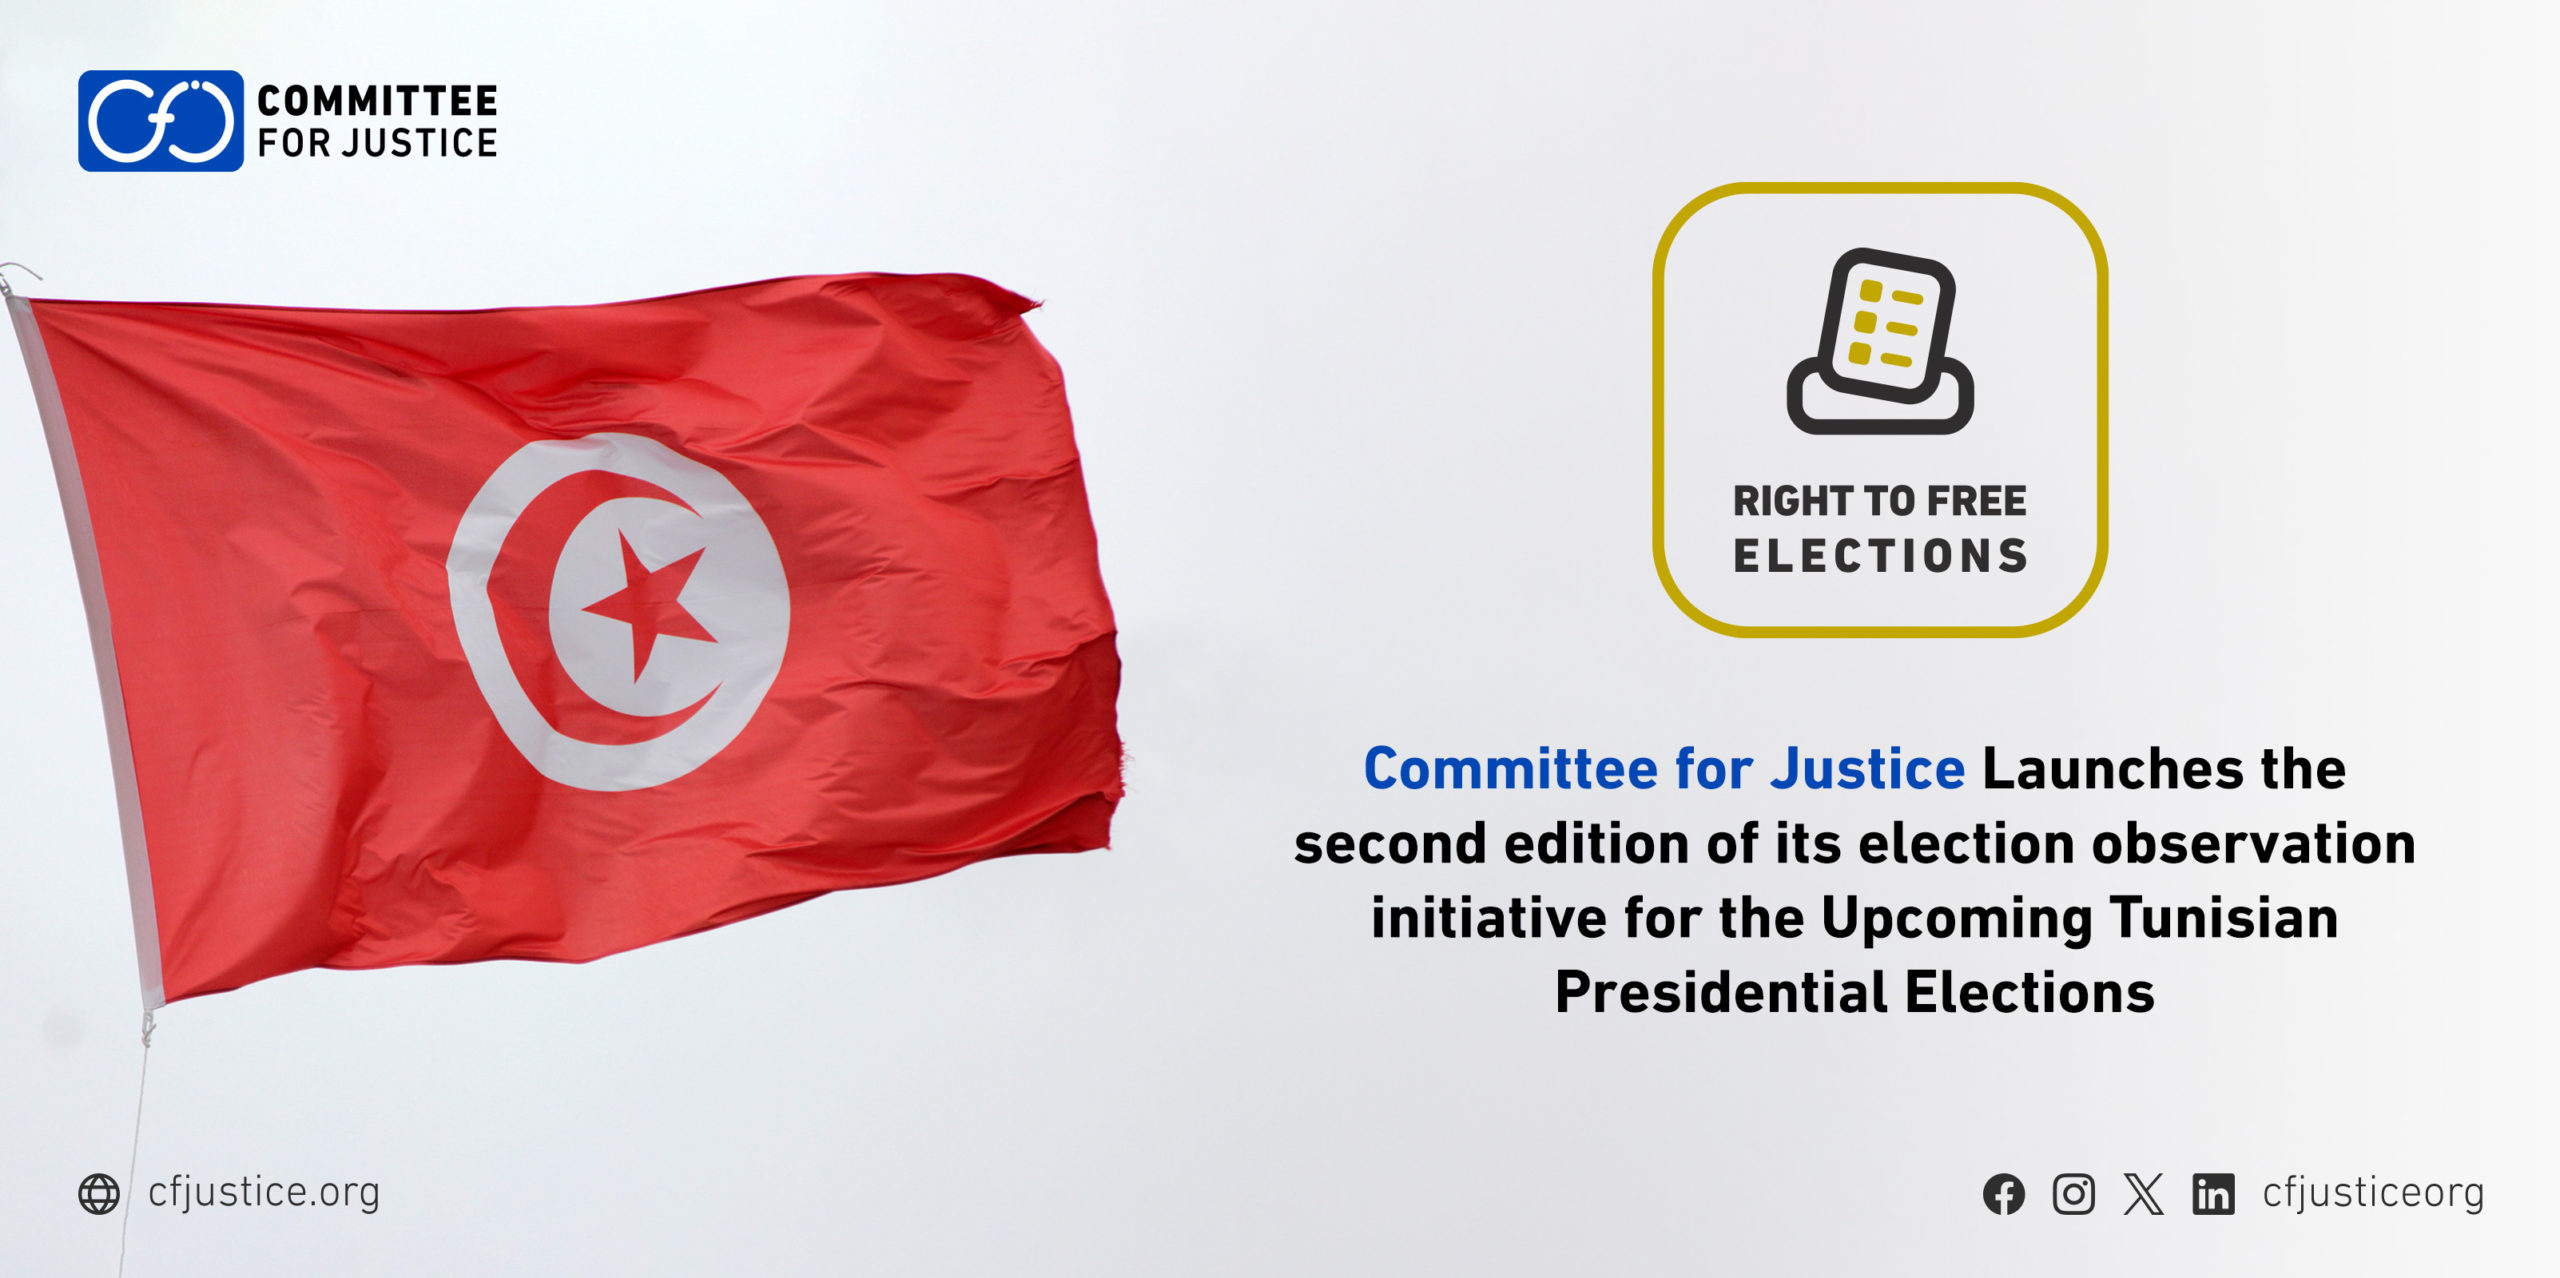 The Committee for Justice Launches the second edition of its election observation initiative for the Upcoming Tunisian Presidential Elections